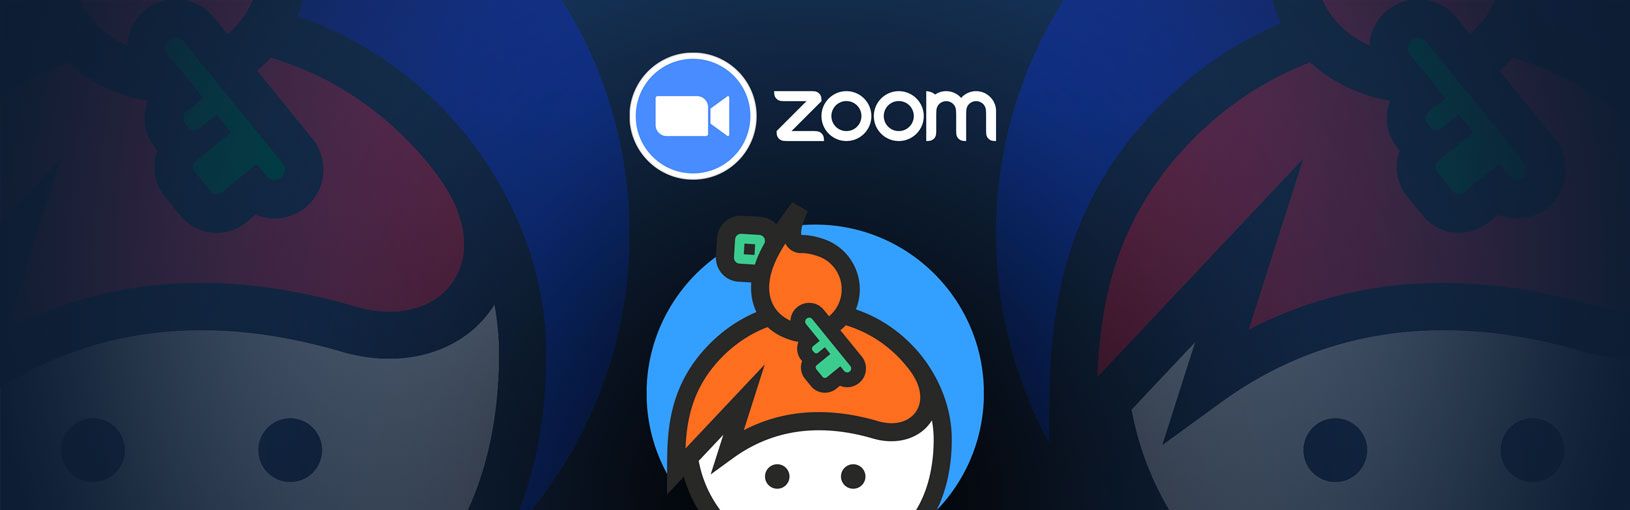 deleted zoom keybase app images from